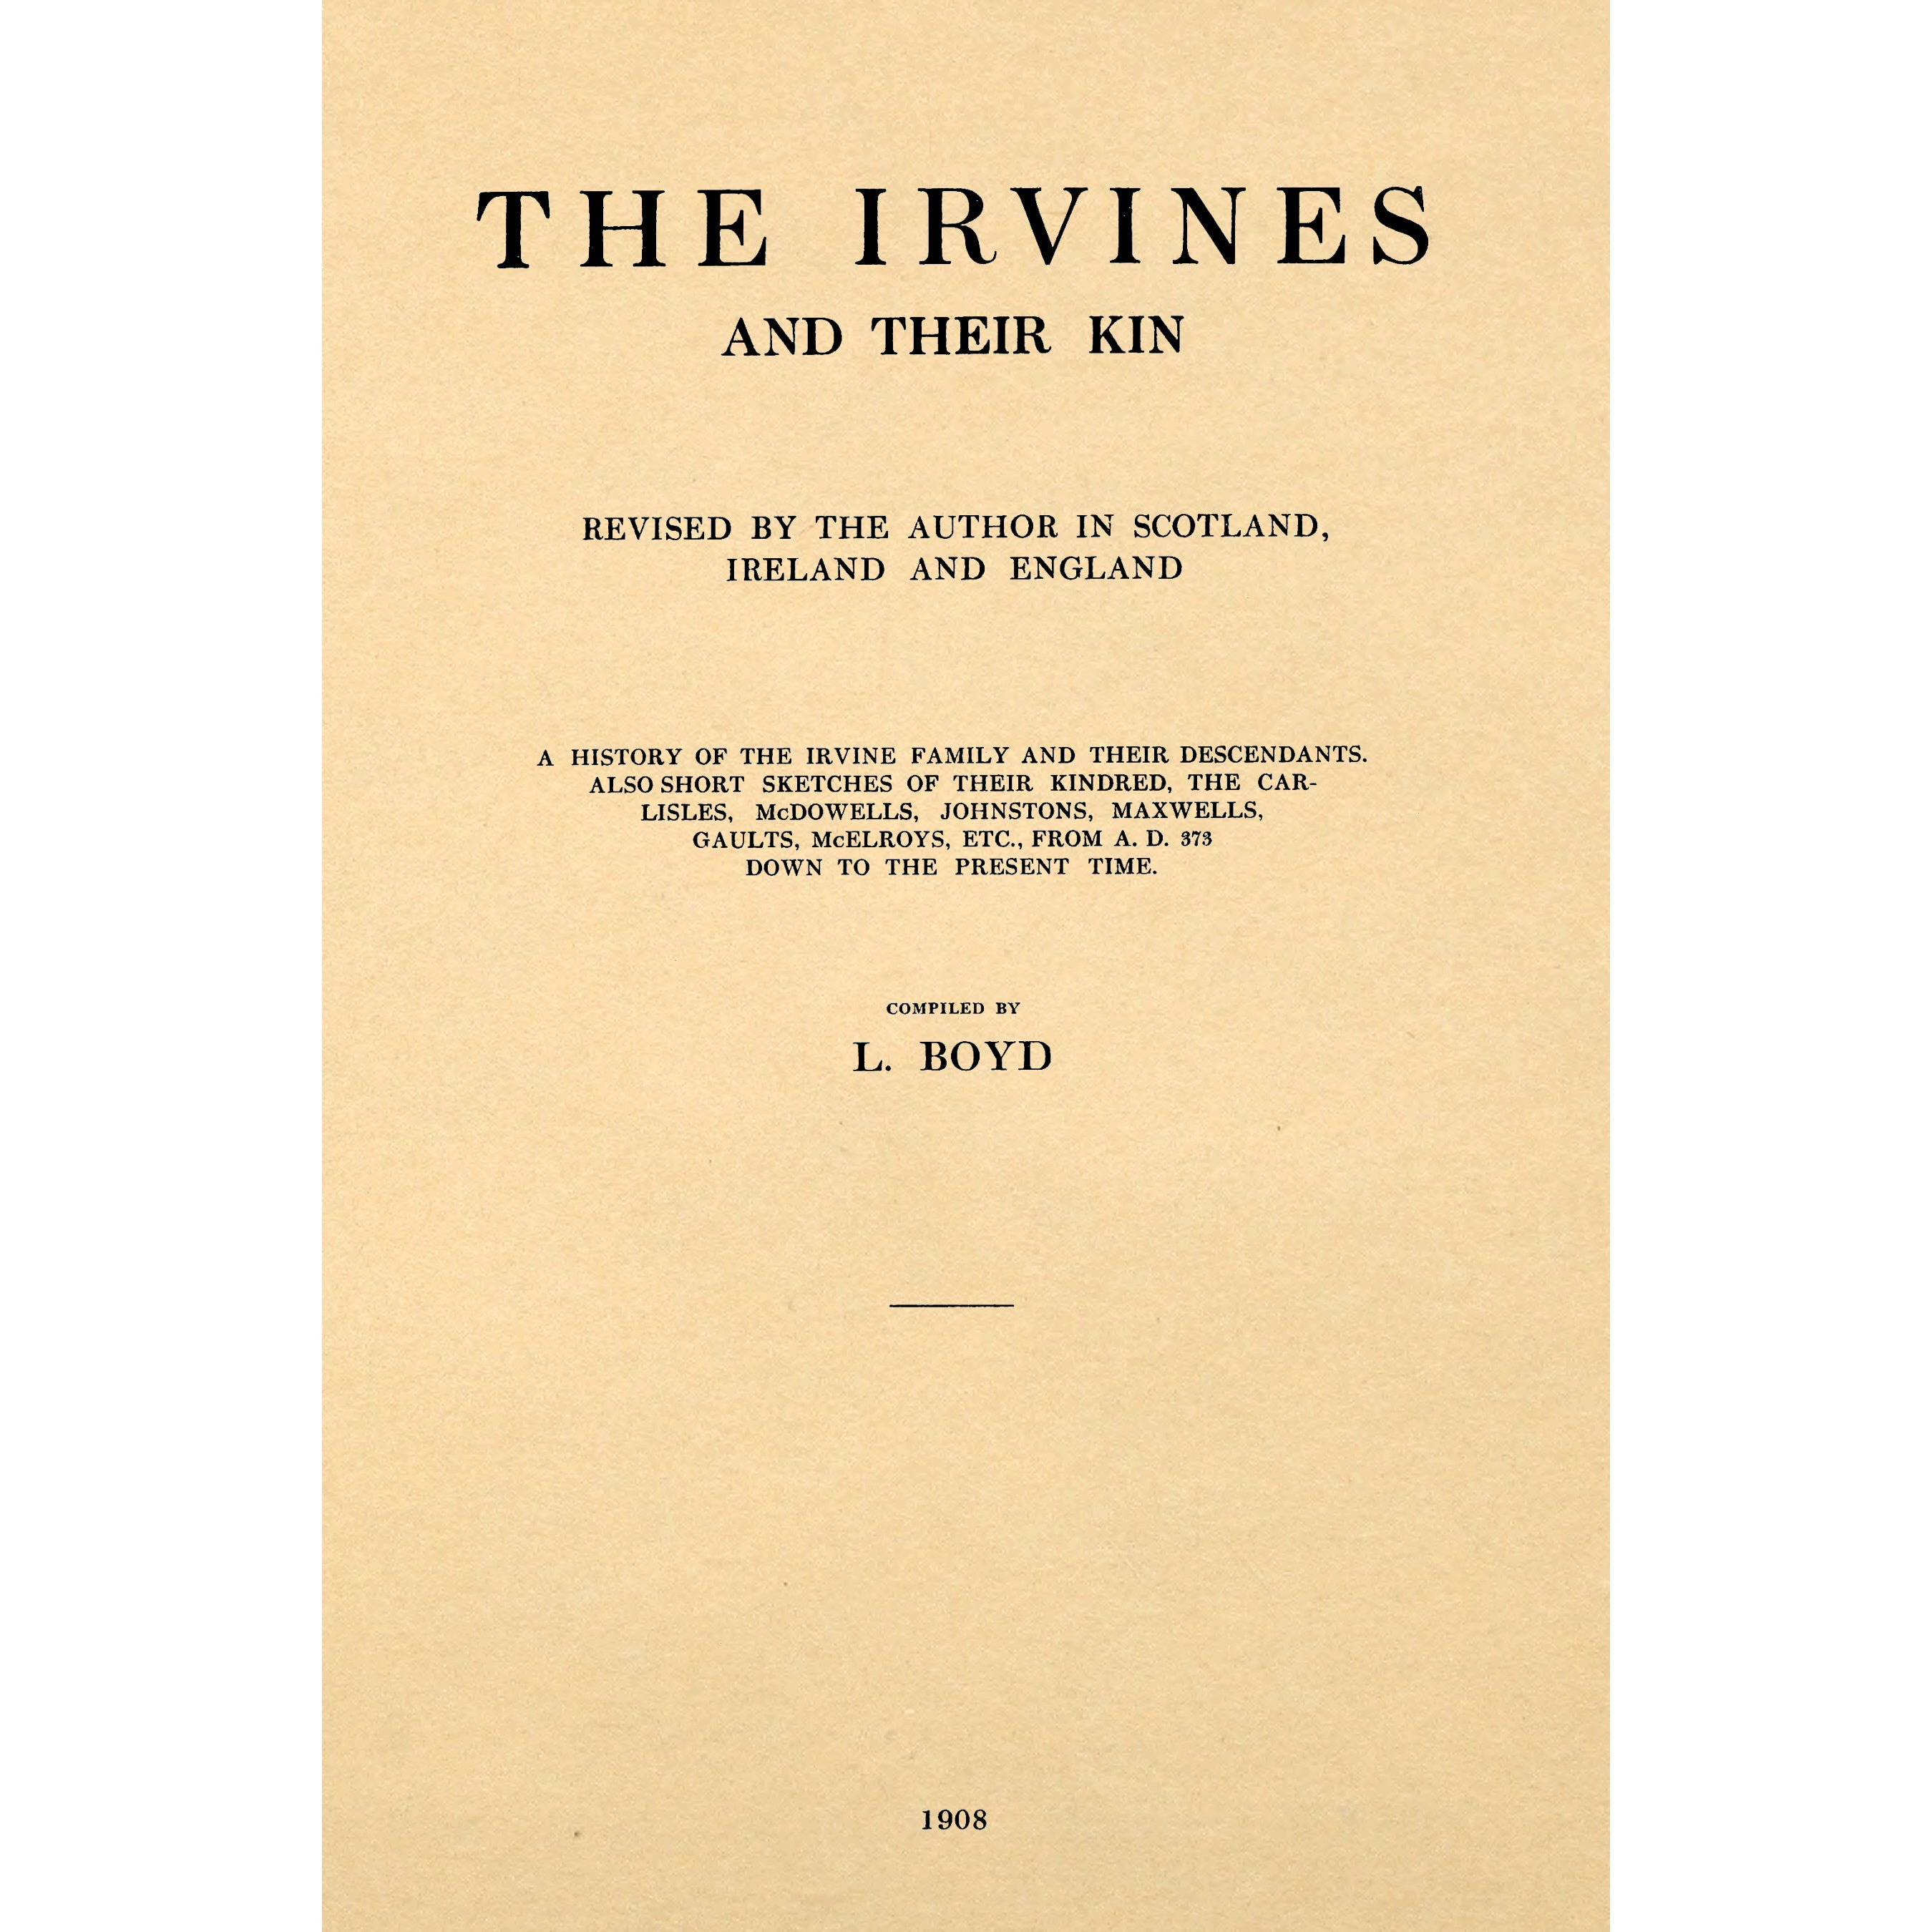 The Irvines and their kin; revised by the author in Scotland, Ireland and England; a history of the Irvine family and their descendants